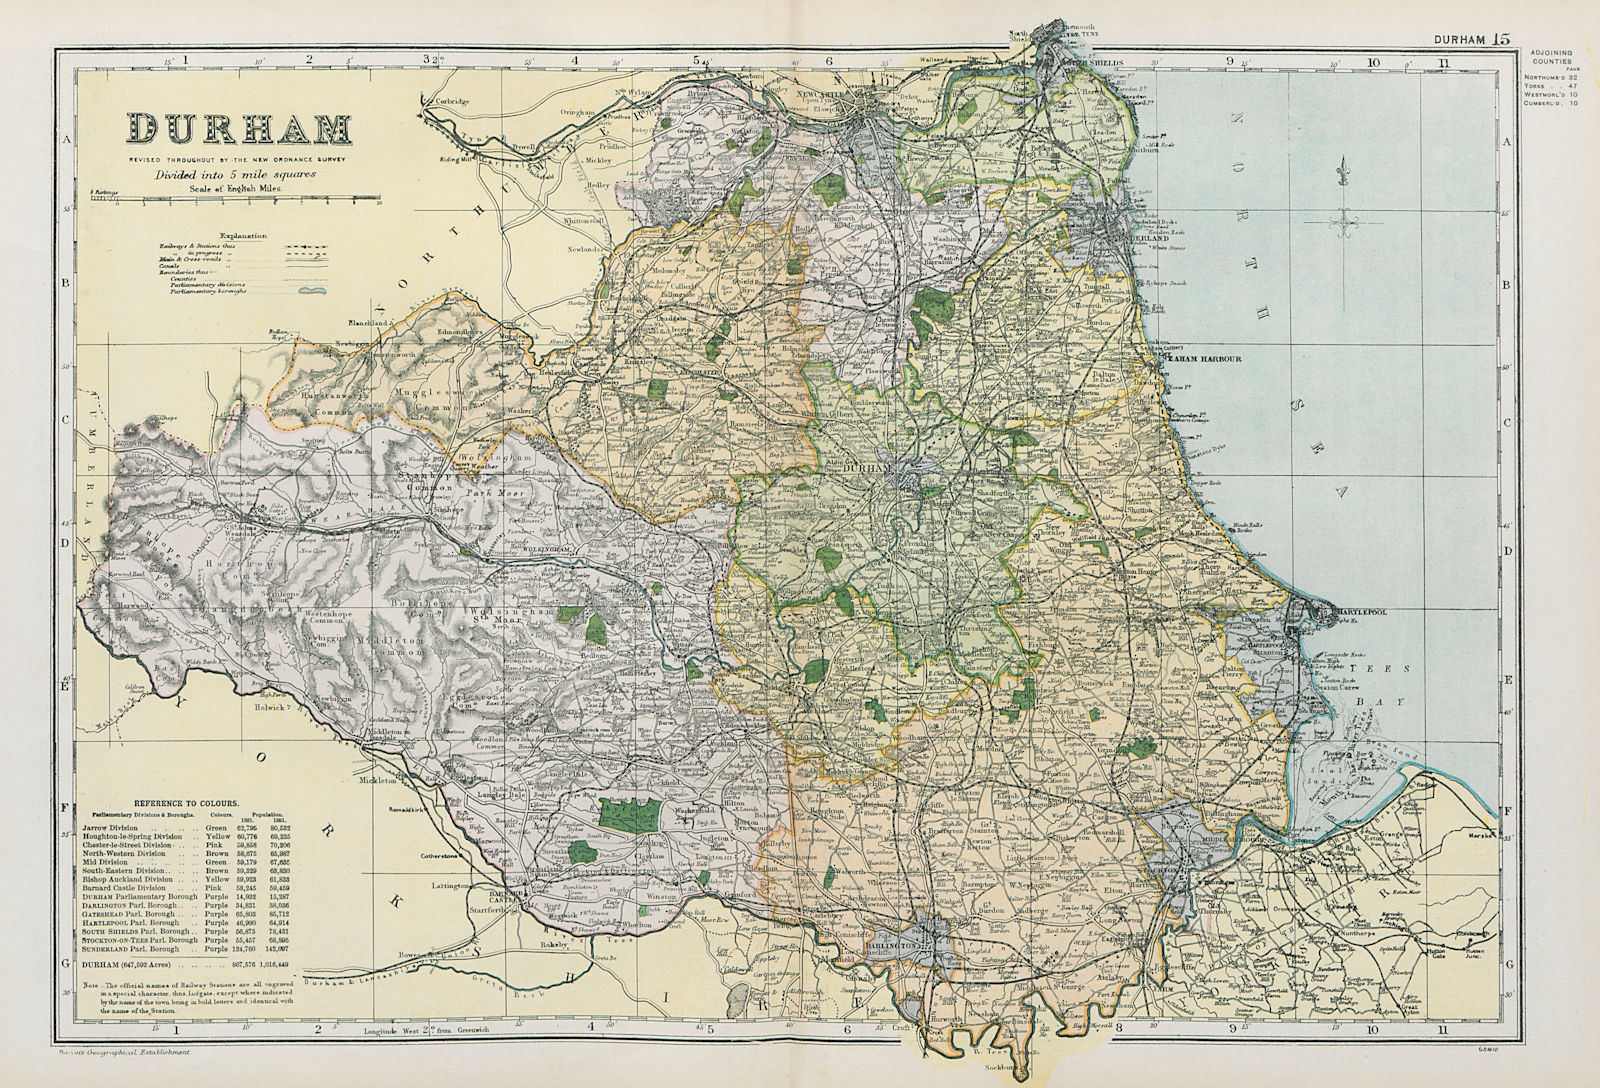 Associate Product DURHAM. Showing Parliamentary divisions, boroughs & parks. BACON 1900 old map